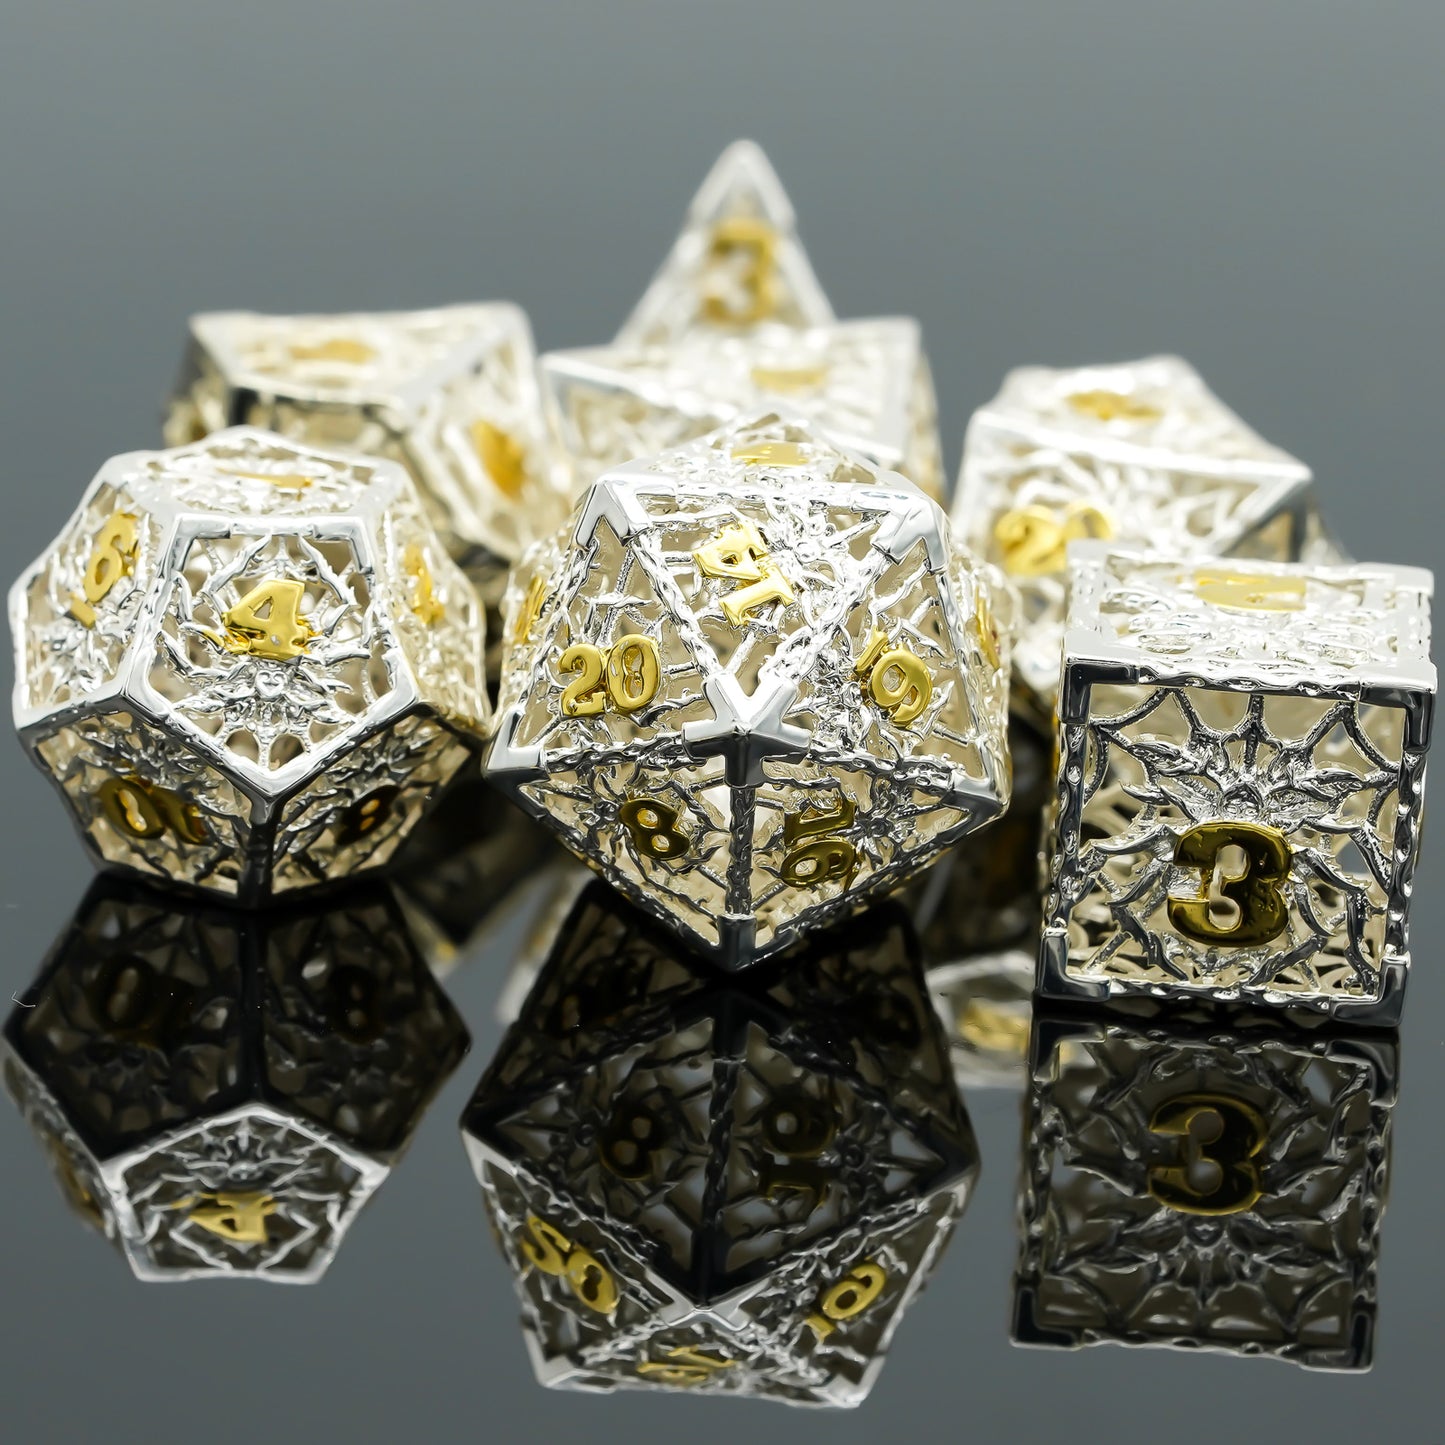 silver dice set made of hollow metal with gold numbers